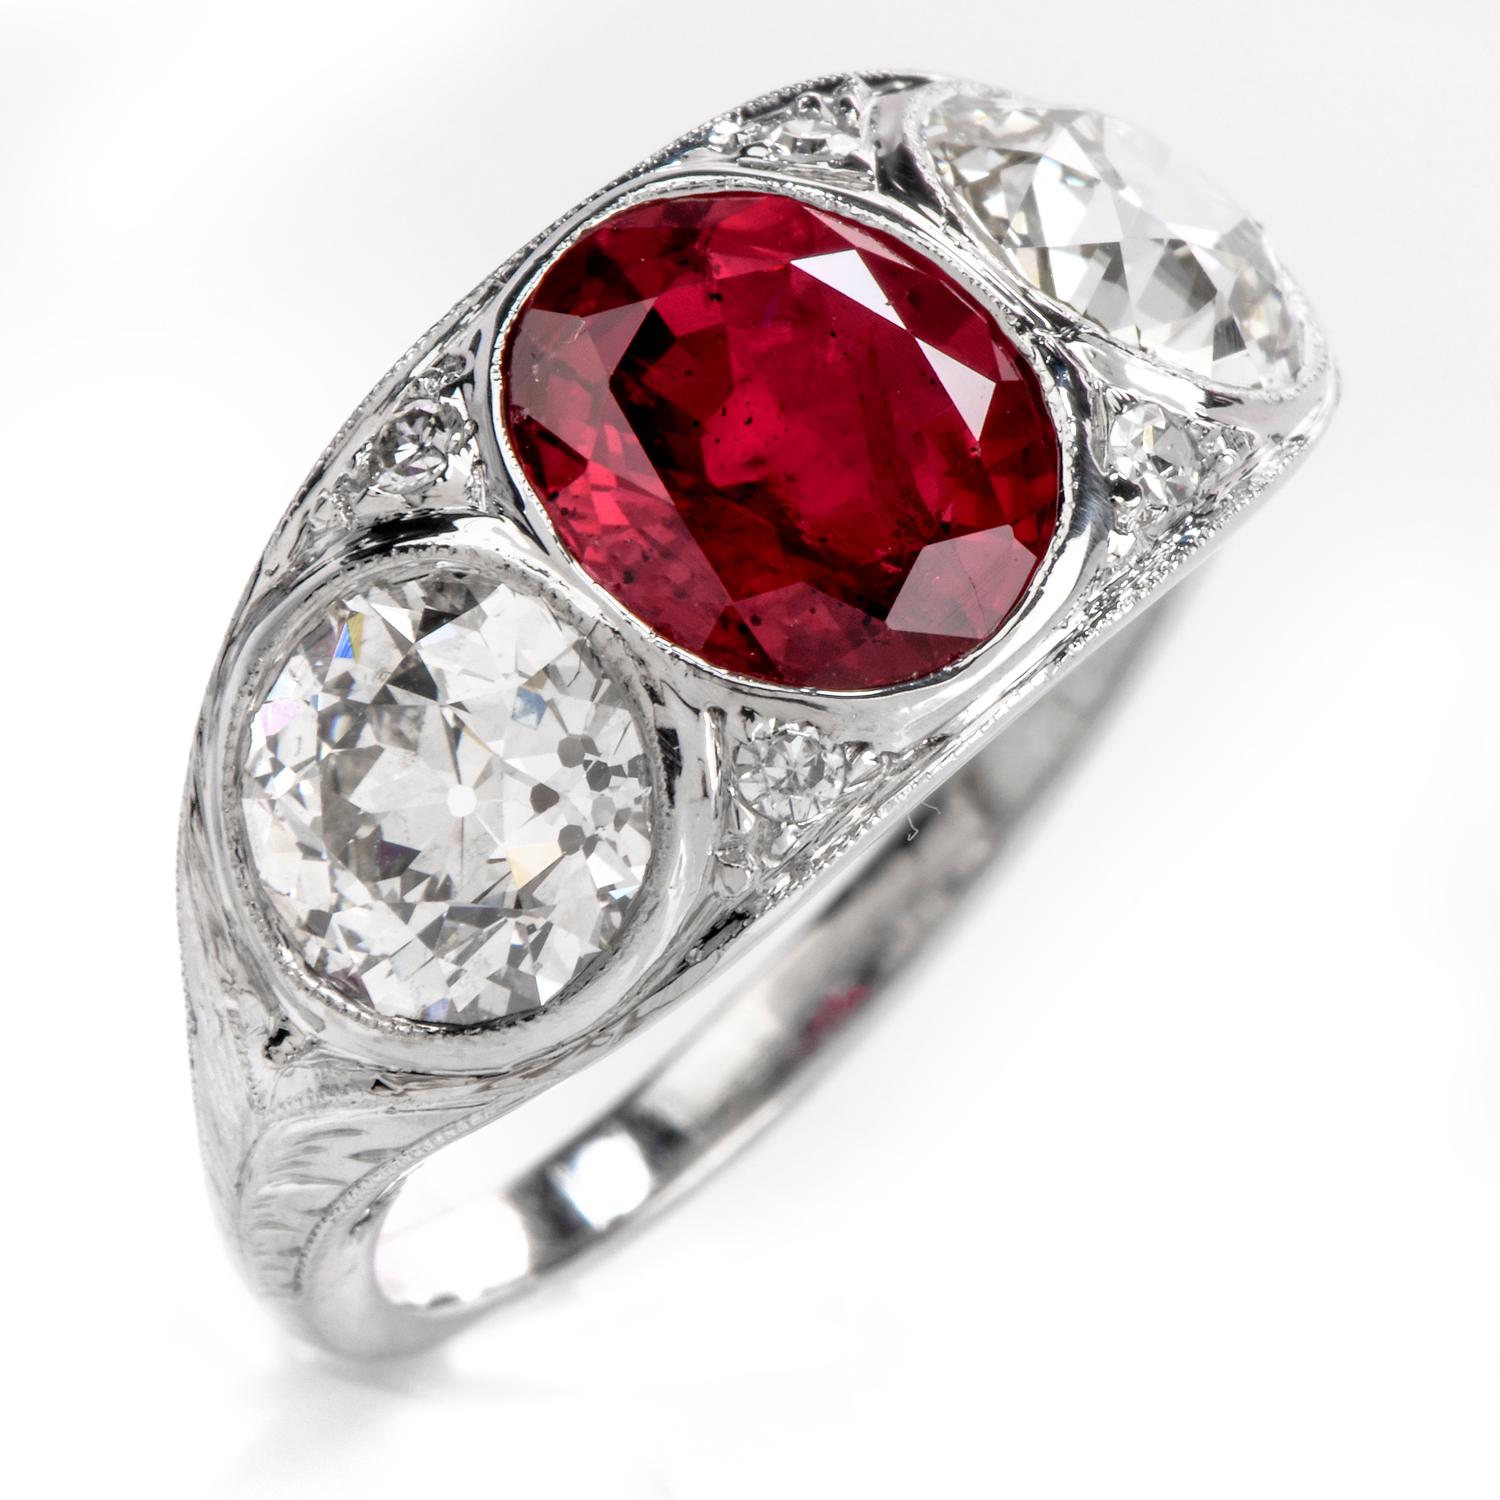 his classic Antique Deco three stone ring crafted in platinum is centered with one lavish GIA certified Natural oval brilliant cut red ruby (heat treated). The nice red natural corundum is flanked on each side with 2 Old European cut diamonds and